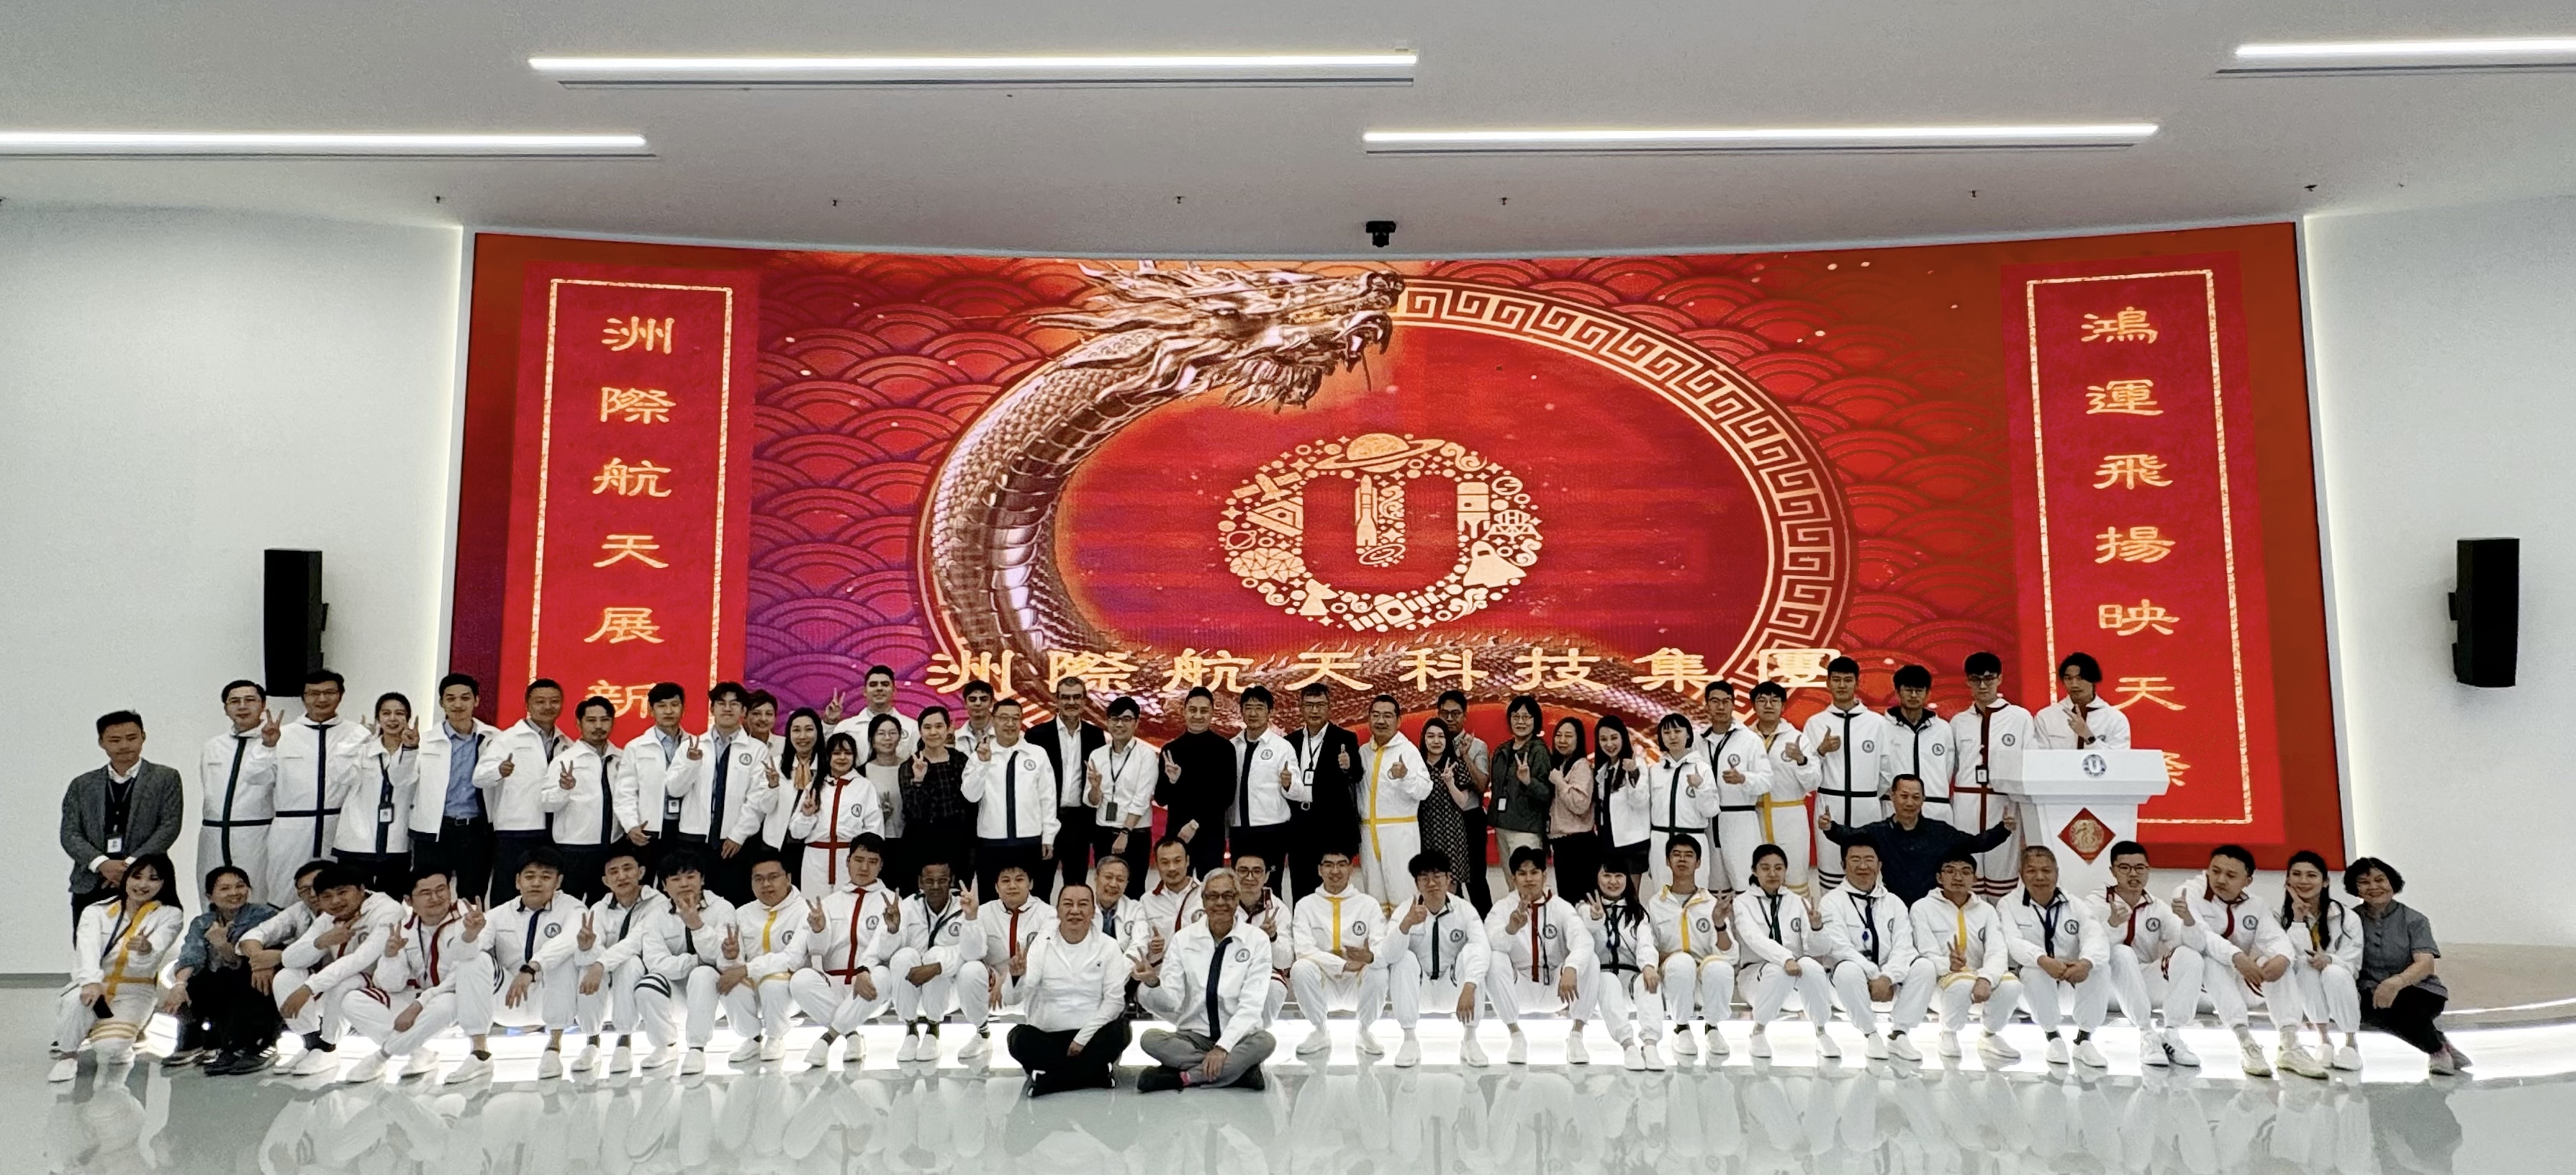 USPACE Chairman and CEO, Along with 1,200 Employees, Extend Chinese New Year Greetings for the Year of the Dragon